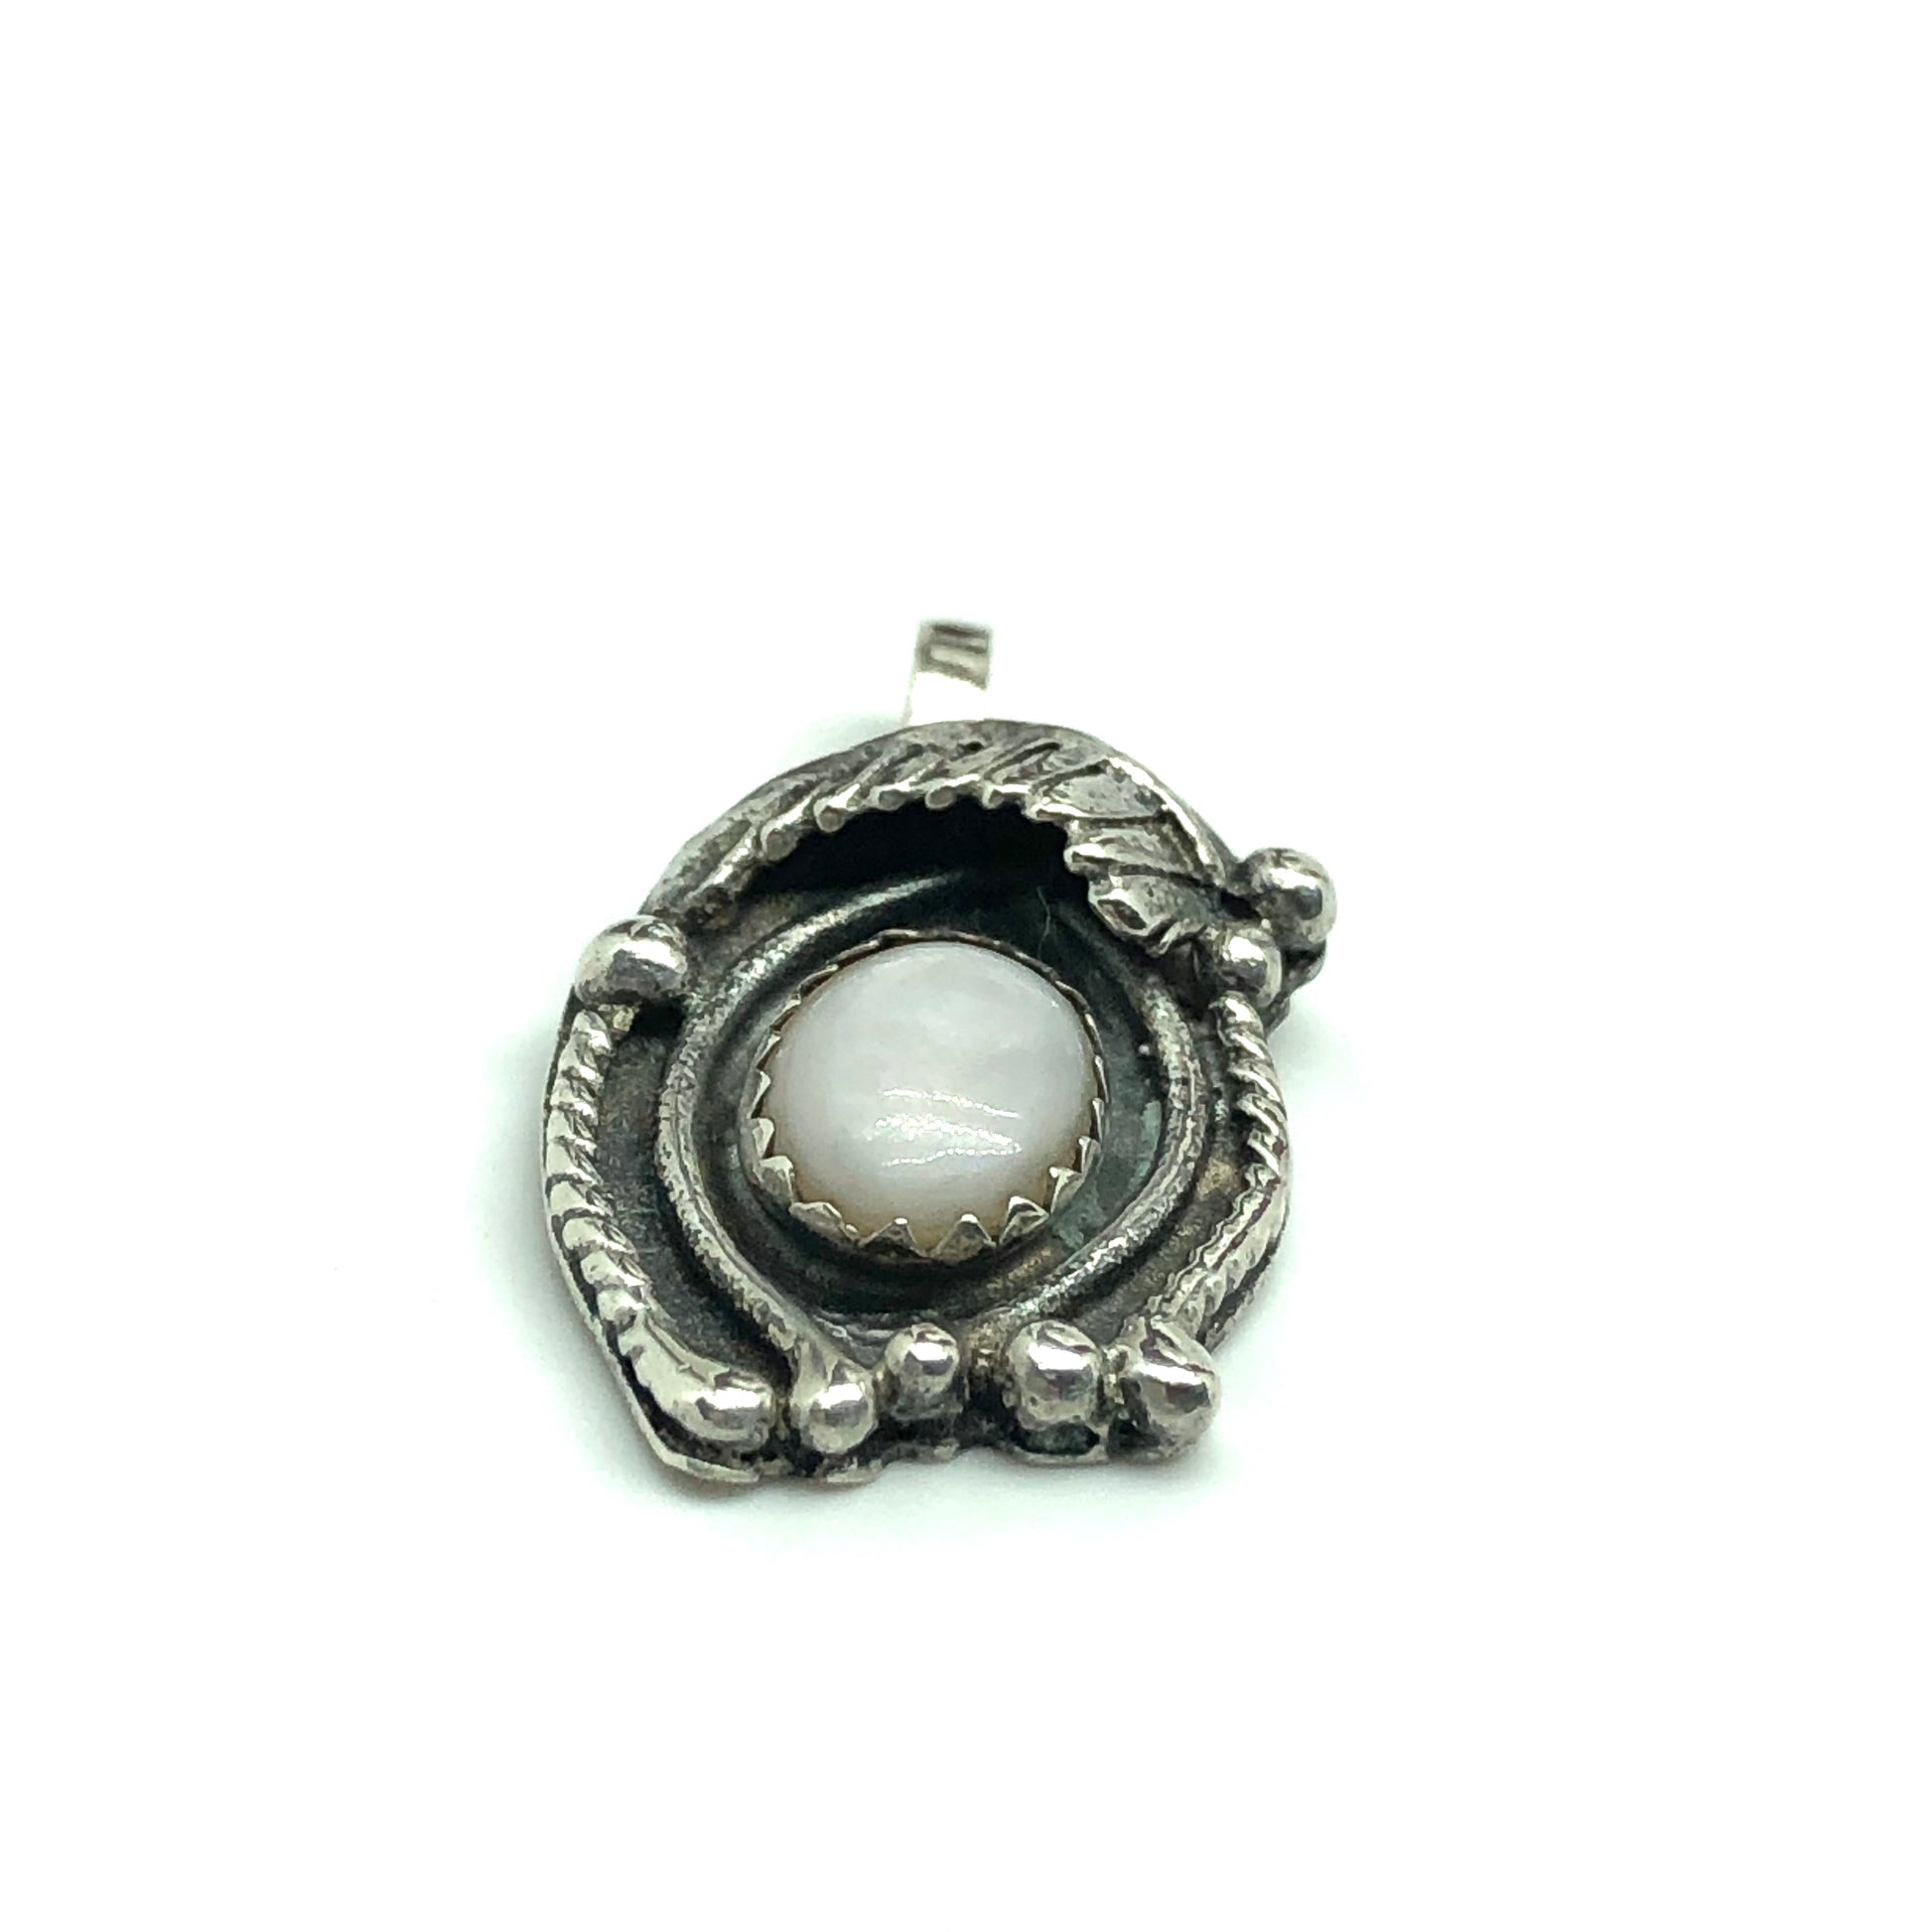 Vintage Jewelry | Sterling Silver Abstract Eskimo Art Design Pearl Pendant